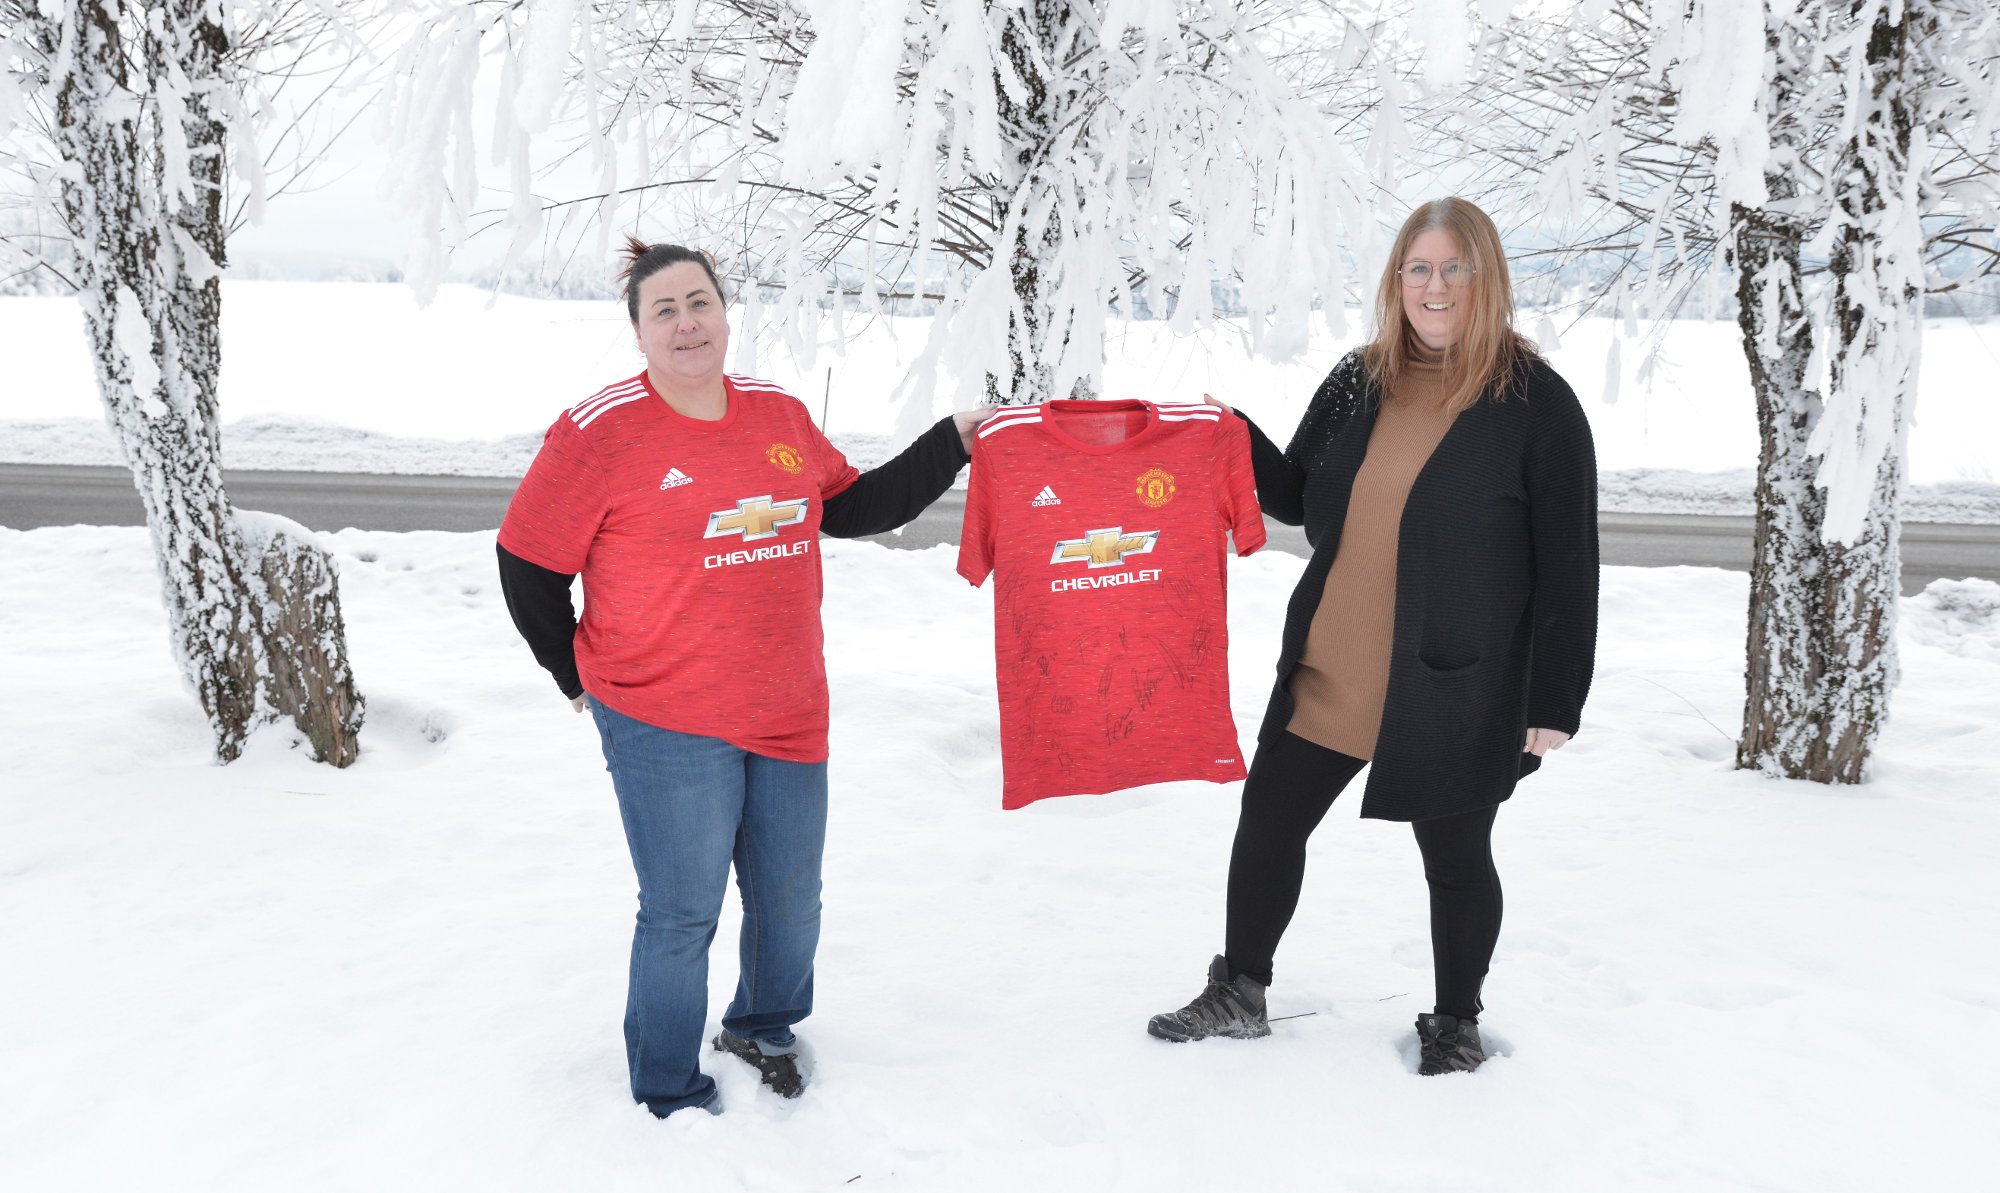 Camill a and Tonje with the Manchester United shirt